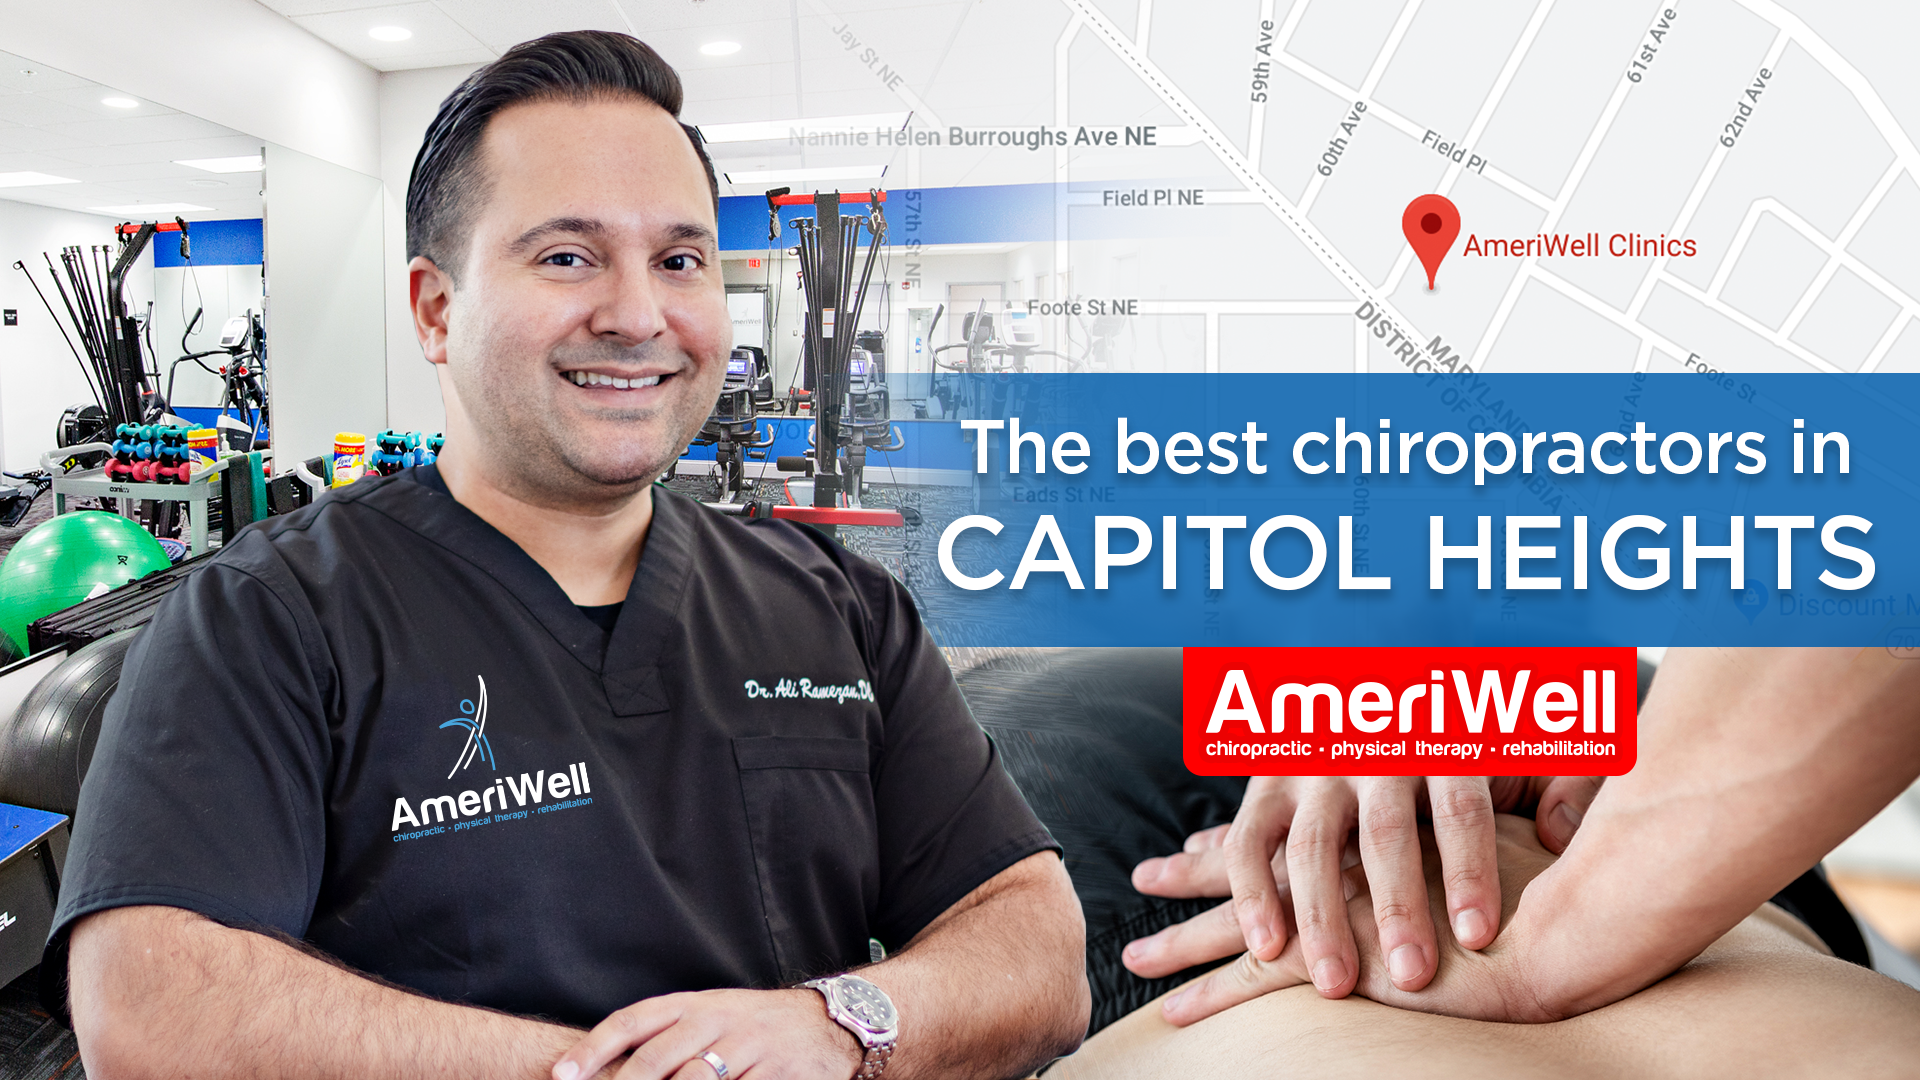 Capitol Heights - Ameriwell Clinics the best chiropractors